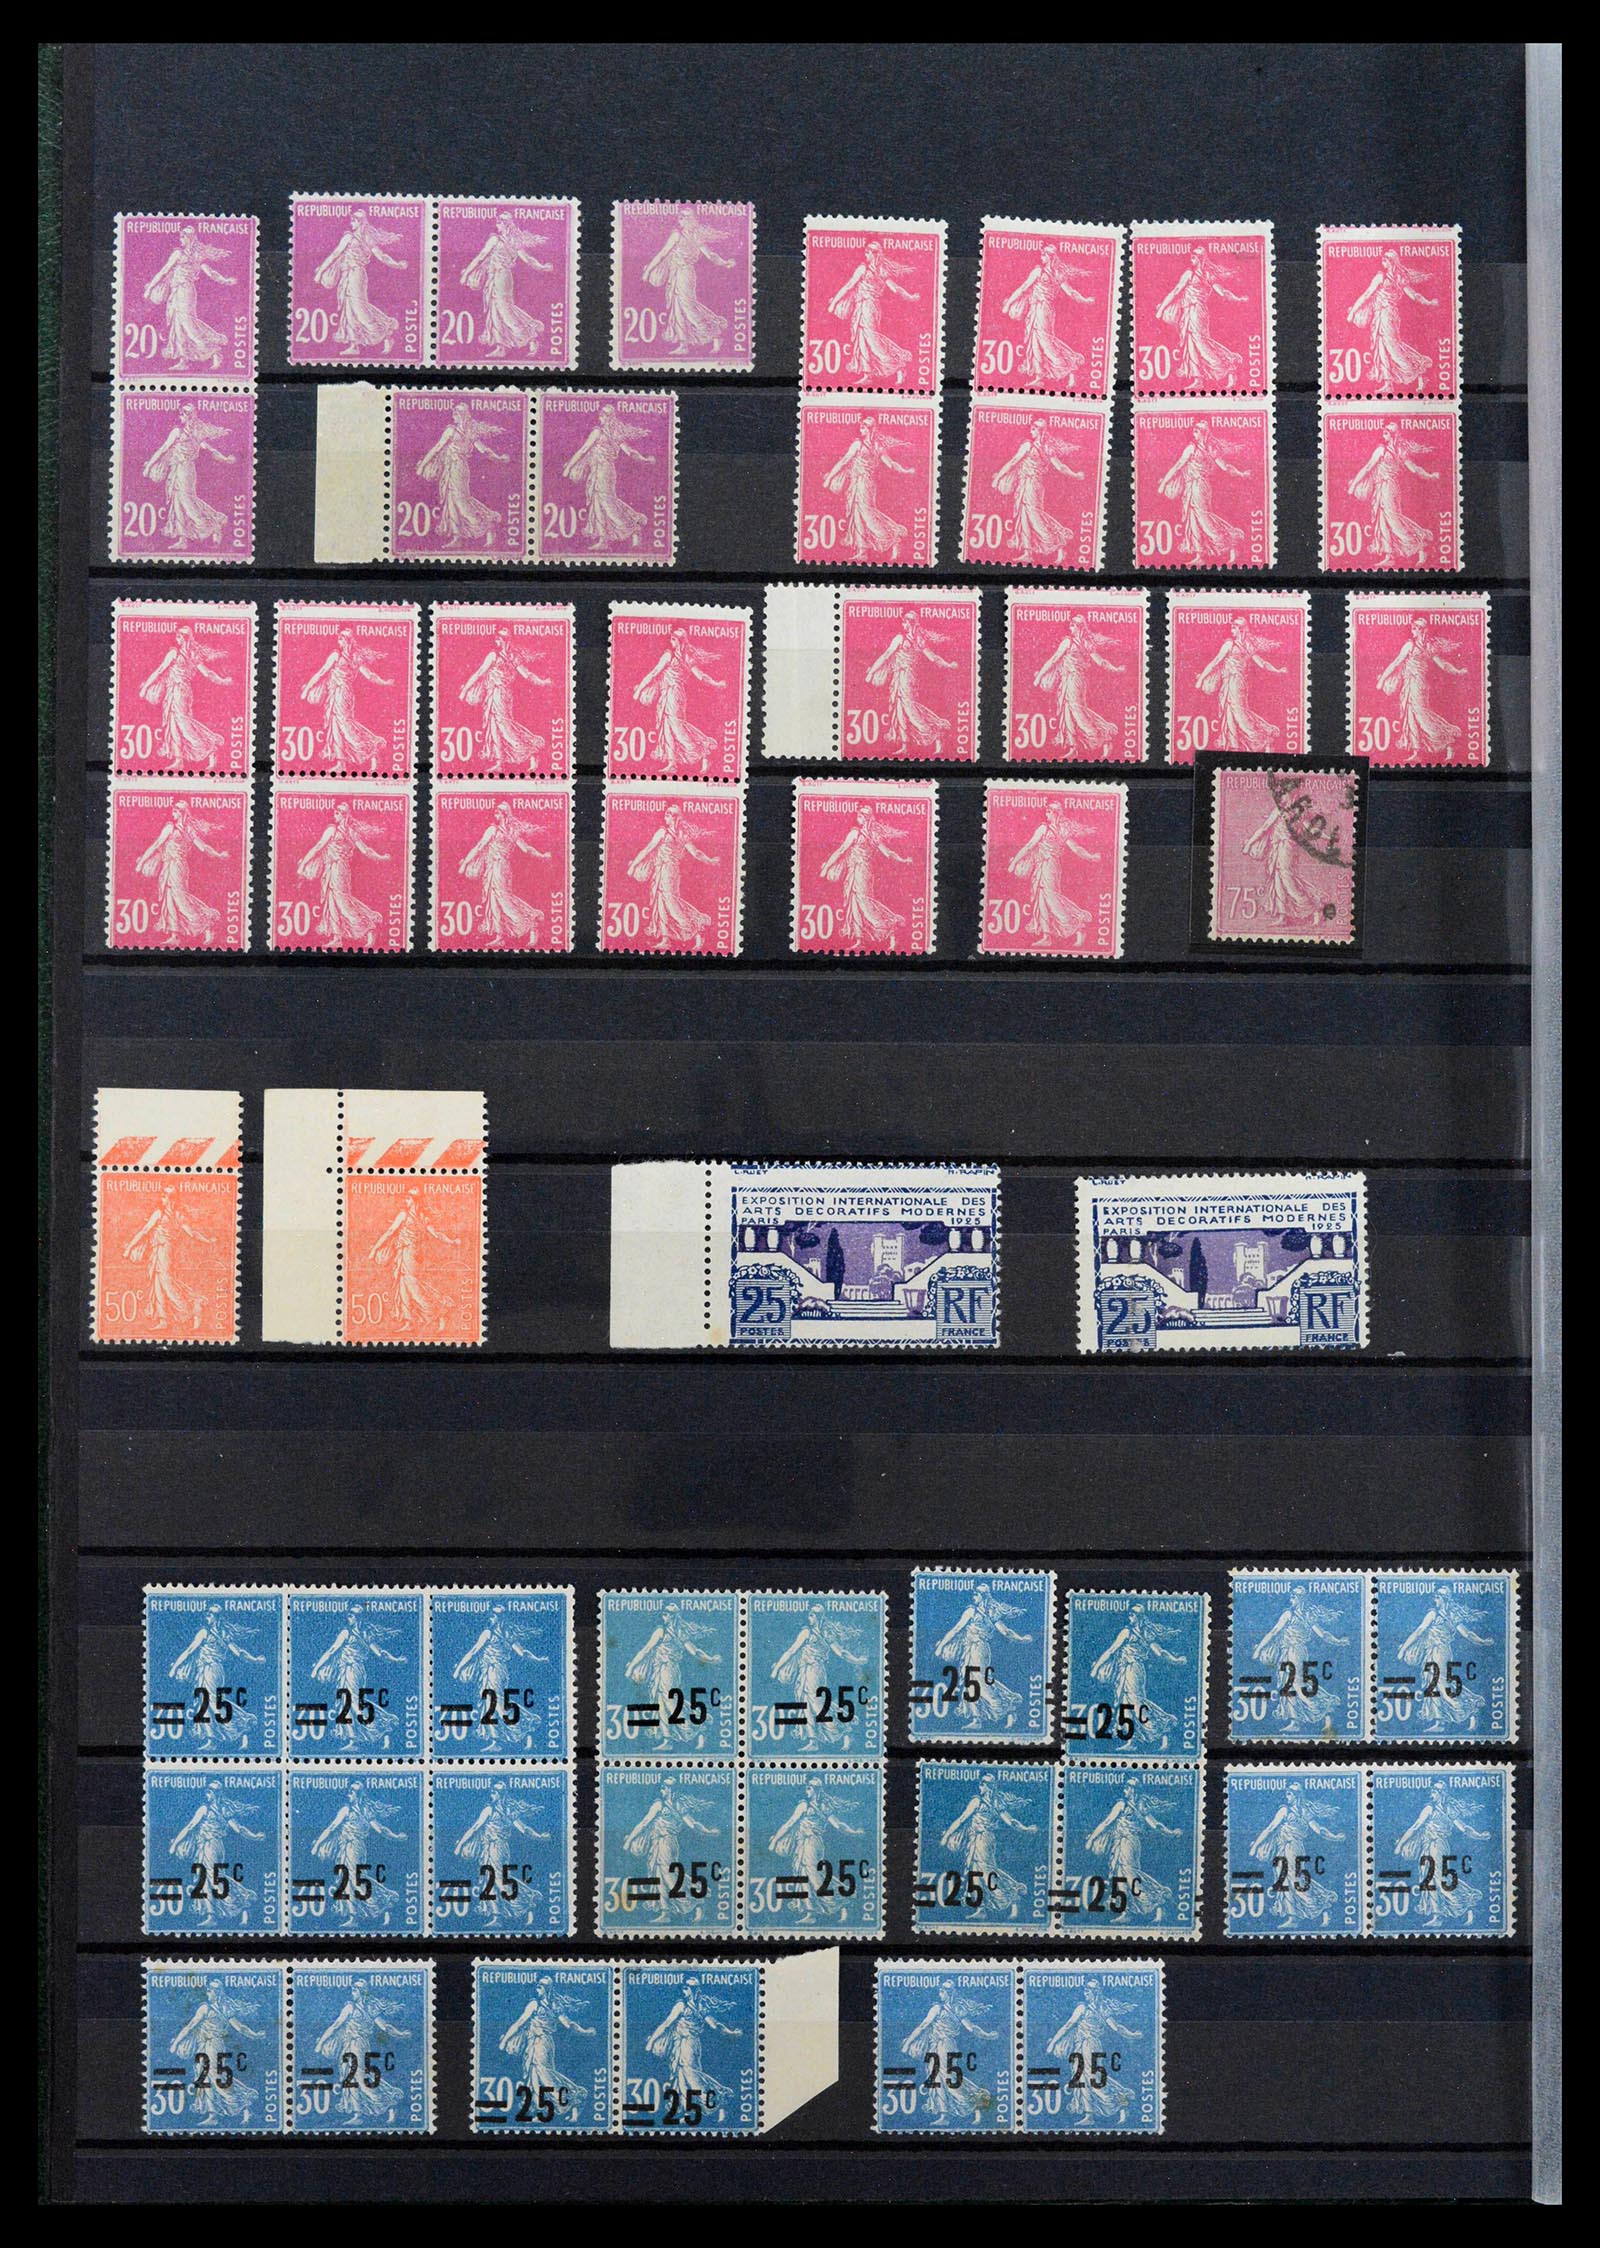 39423 0002 - Stamp collection 39423 France varieties 1862-1985.